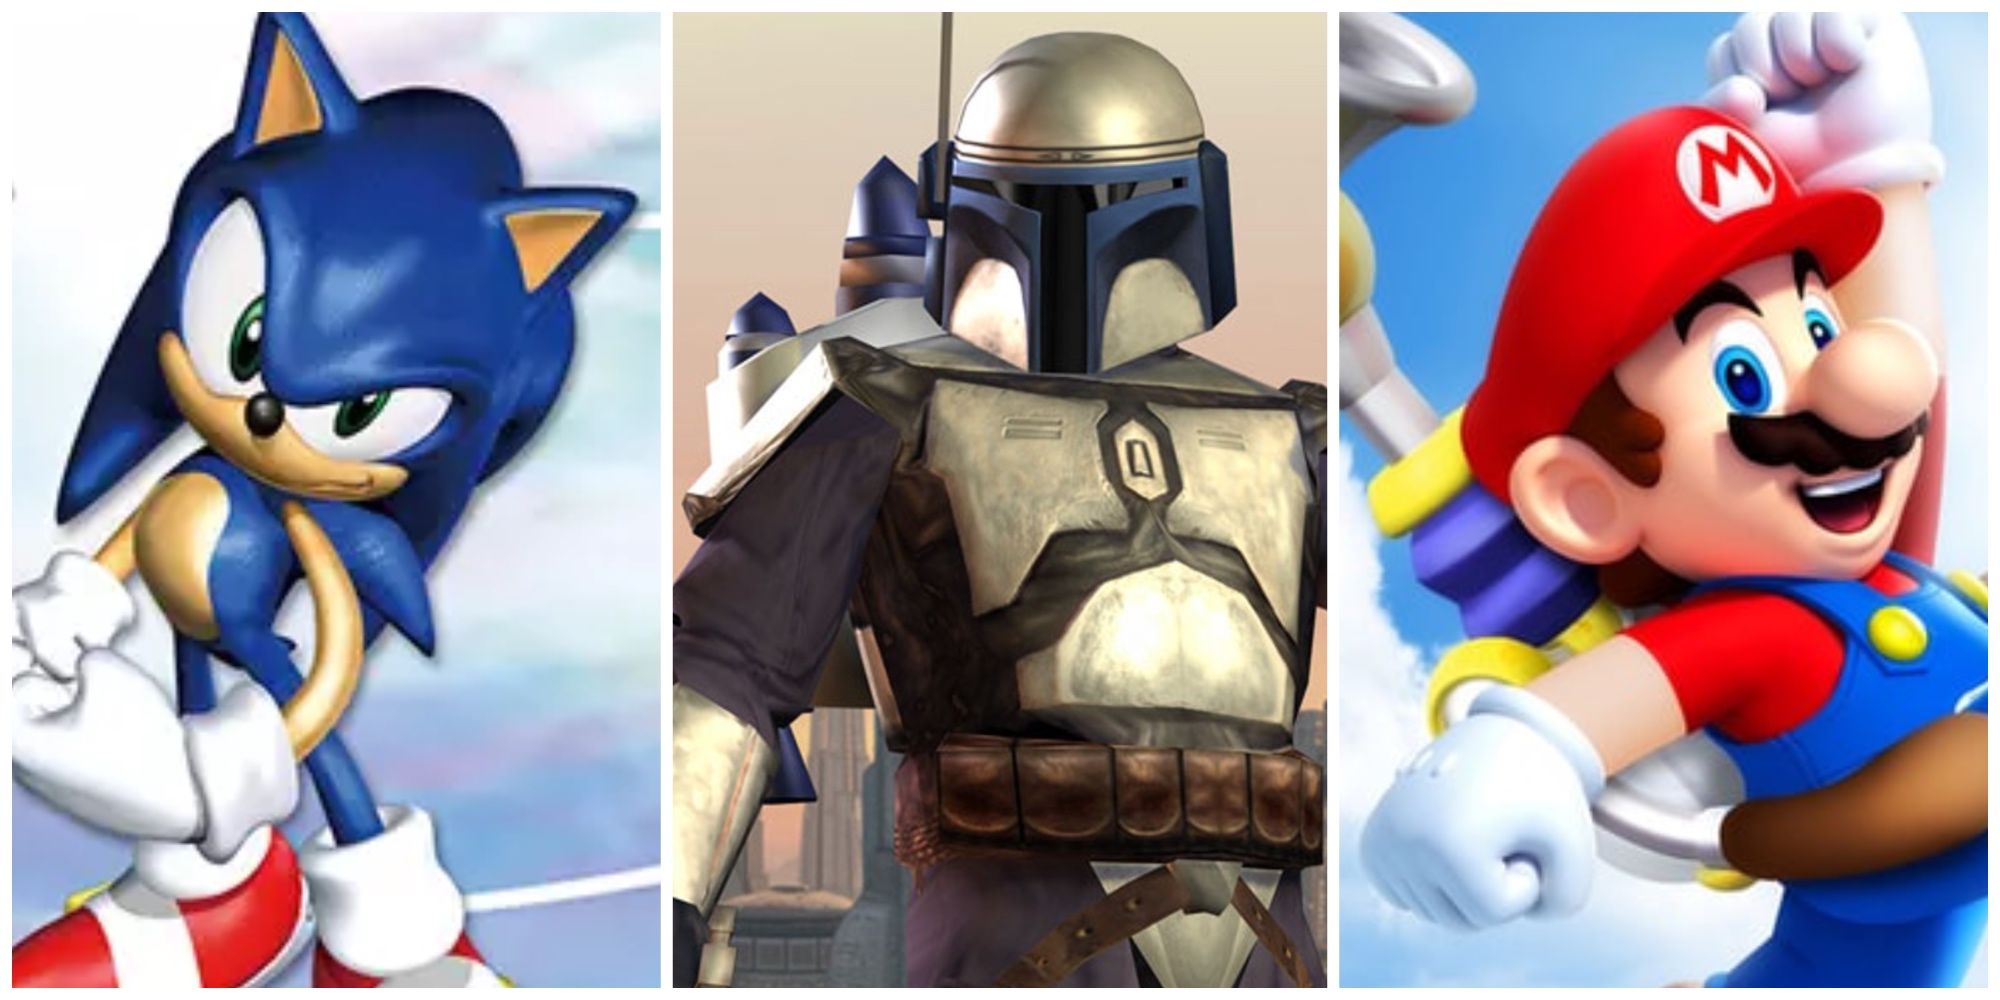 Sonic, Jango Fett and Mario side by side